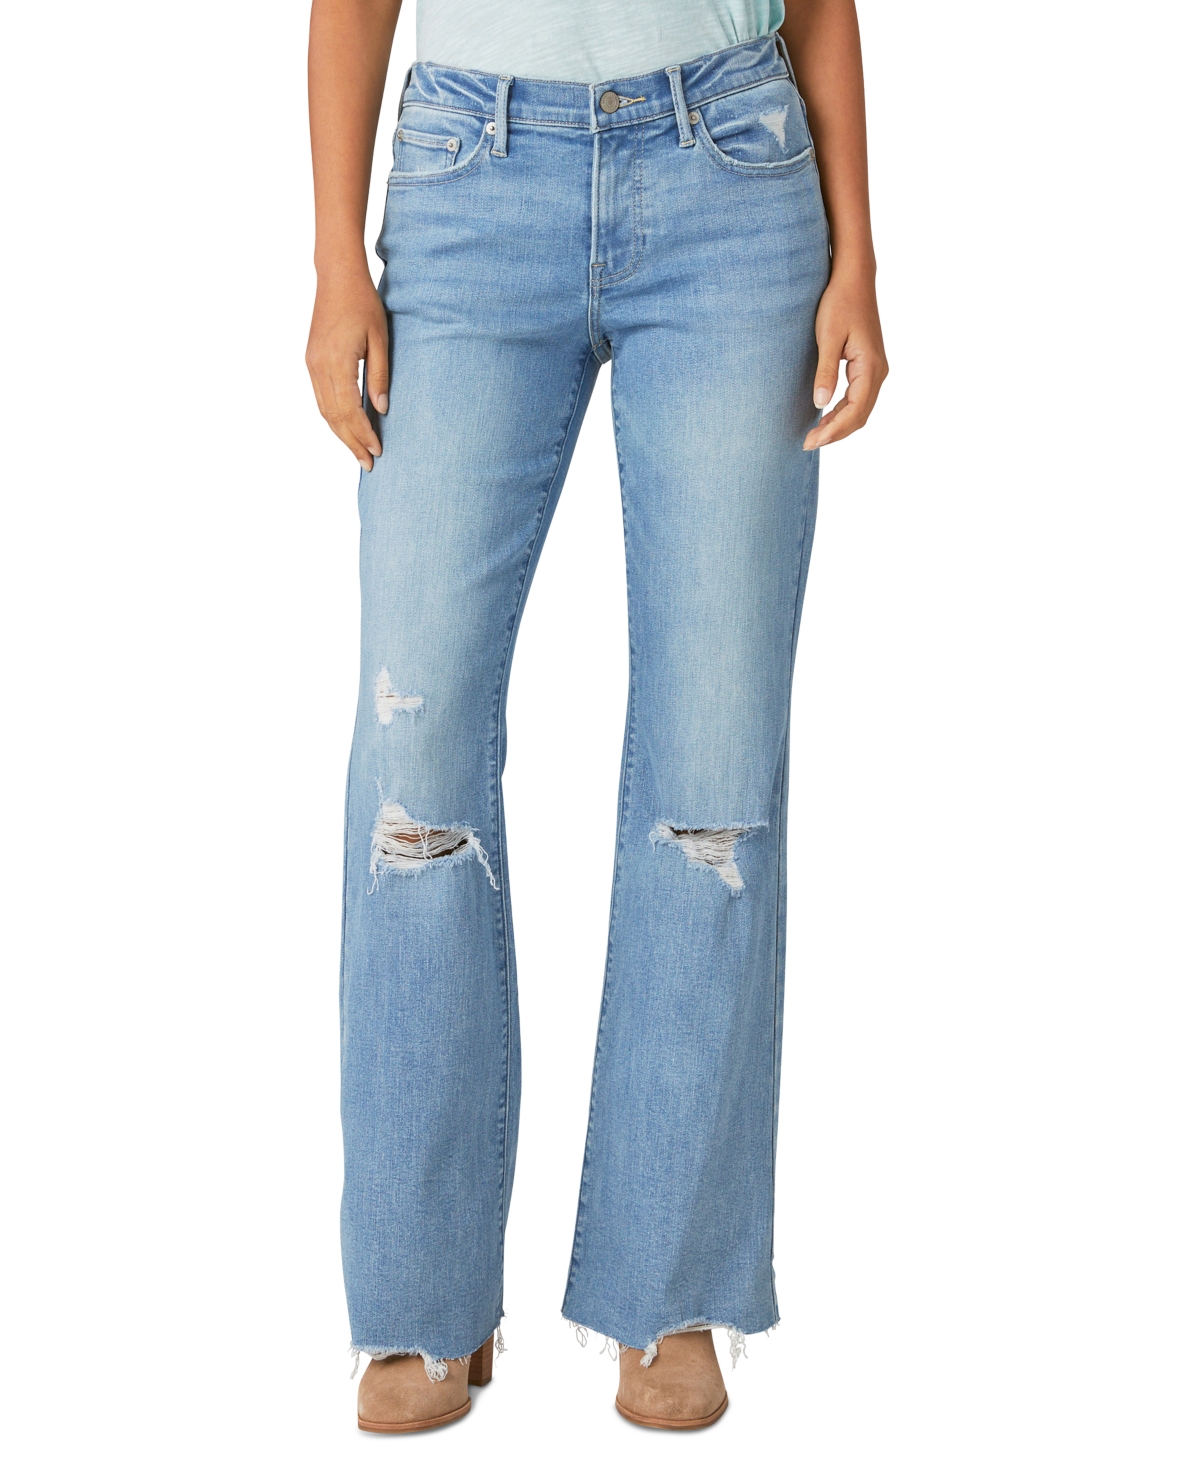 LUCKY BRAND WOMEN'S SWEET FLARE DISTRESSED FRAYED-HEM JEANS